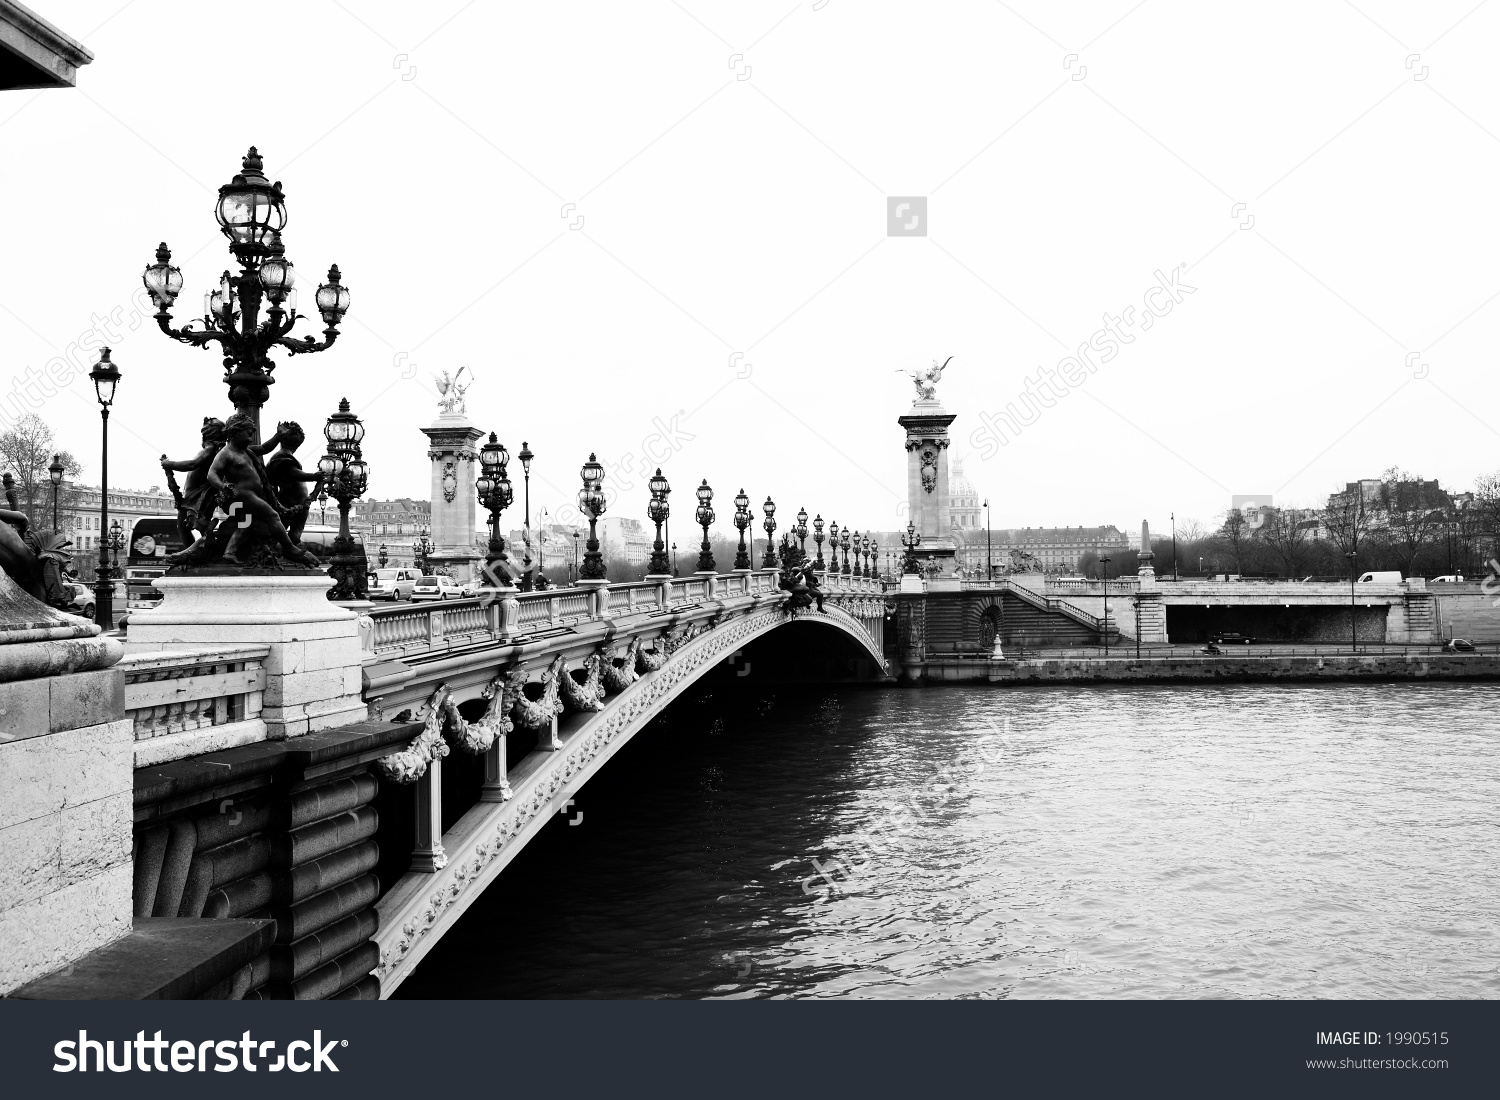 Pont alexandre iii clipart 20 free Cliparts | Download images on ...